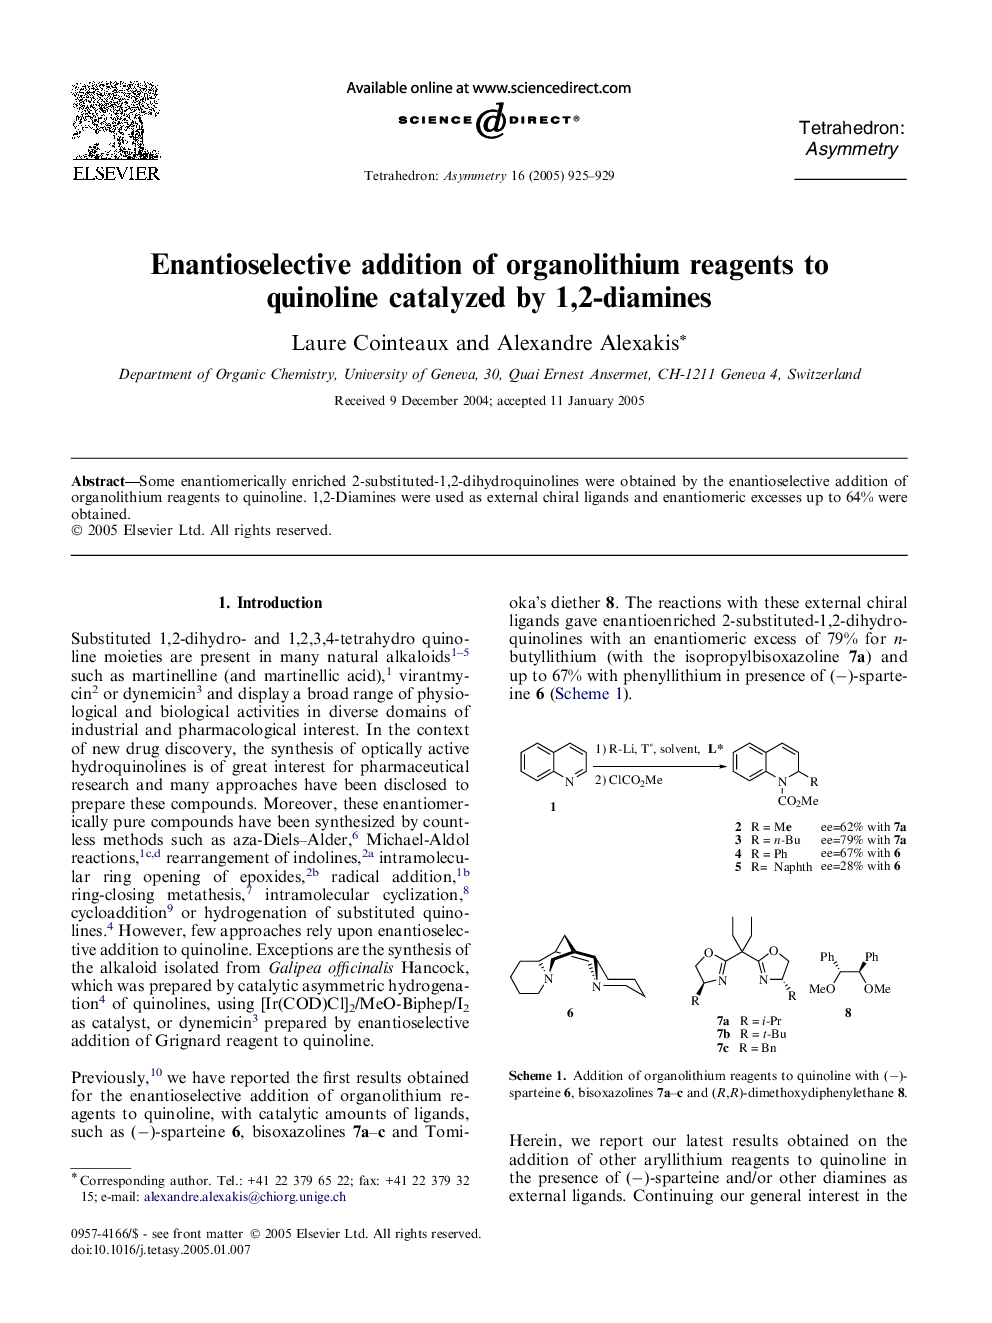 Enantioselective addition of organolithium reagents to quinoline catalyzed by 1,2-diamines